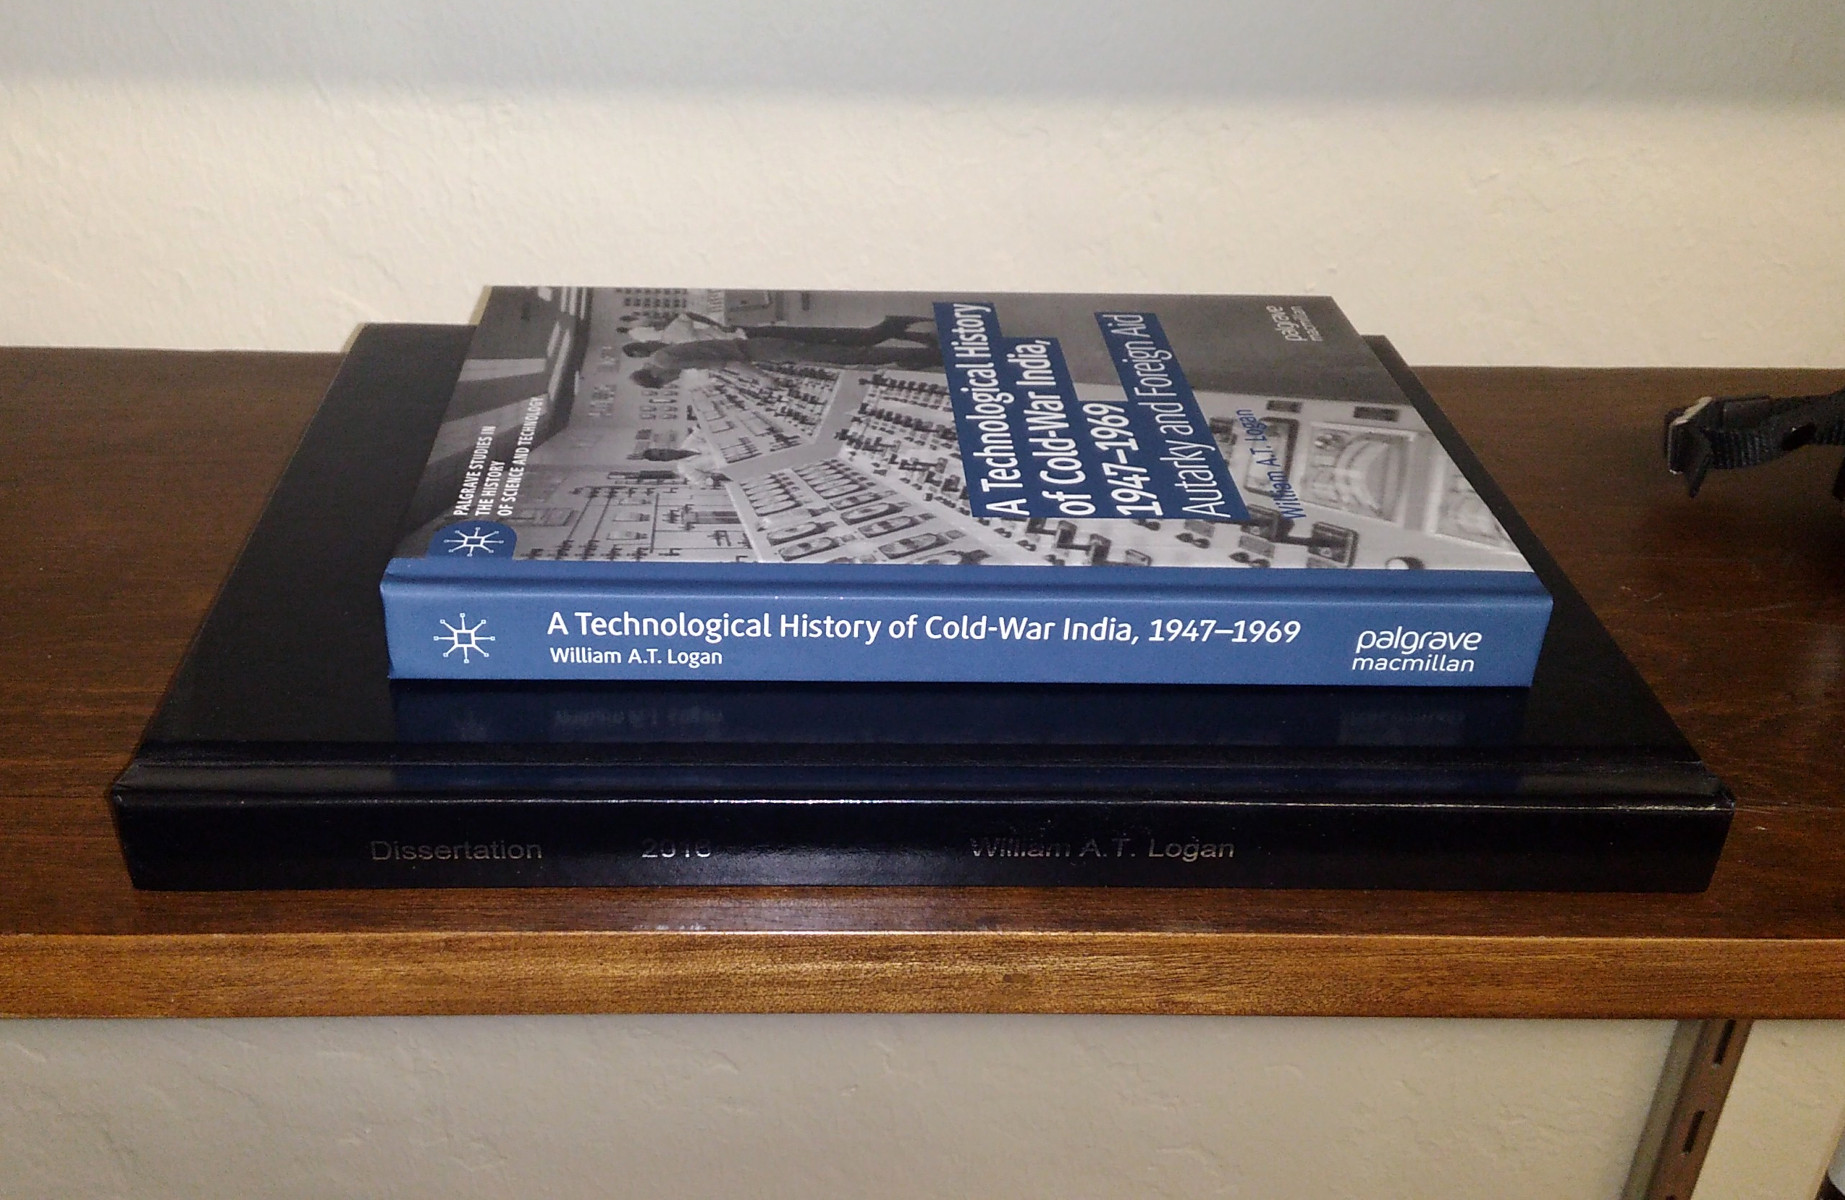 My book, A Technological History of Cold-War India, on top of my dissertation, “Building Nonalignment.”